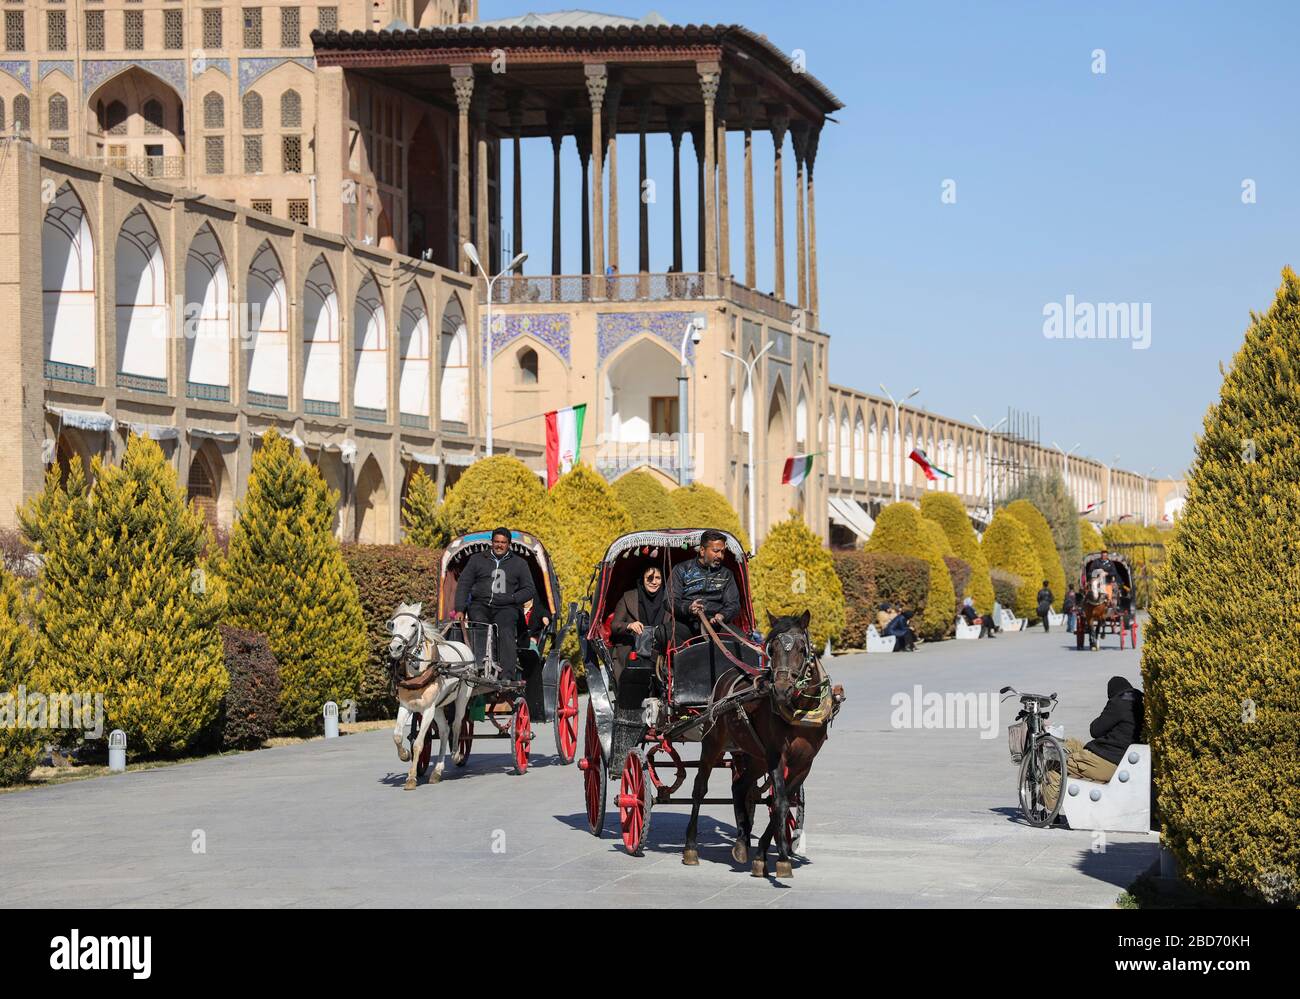 Horse drawn carriages on at Meidan-e Emam, Naqsh-e Jahan, Imam Square, Ali Qapu palace in the background, UNESCO World Heritage Site, Esfahan, Isfahan Stock Photo